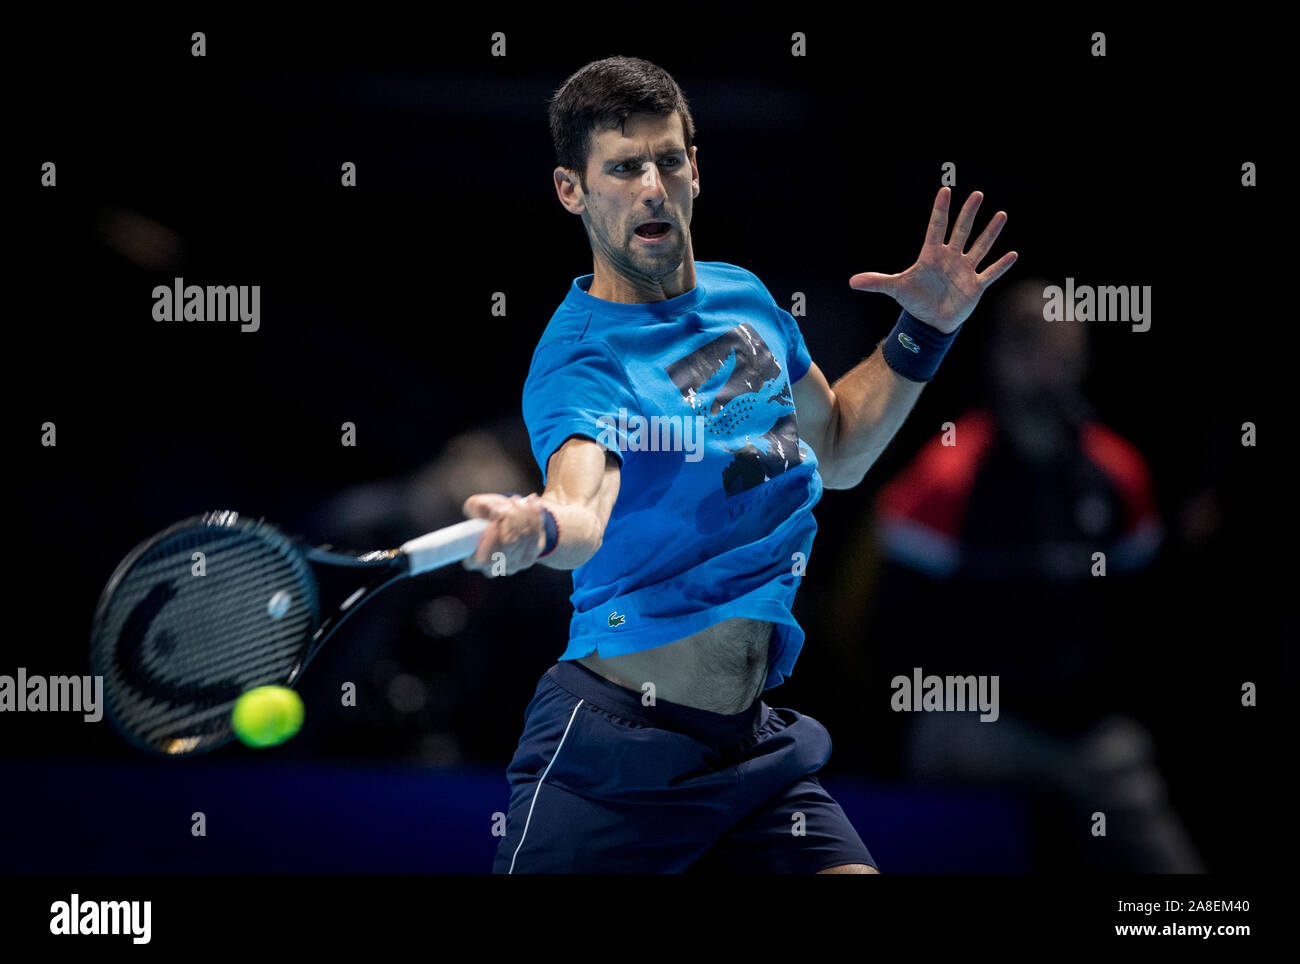 London, UK. 08th Nov, 2019. Novak DJOKOVIC of Serbia during practice at the  Nitto ATP Finals Tennis London MEDIA DAY at the O2, London, England on 8  November 2019. Photo by Andy